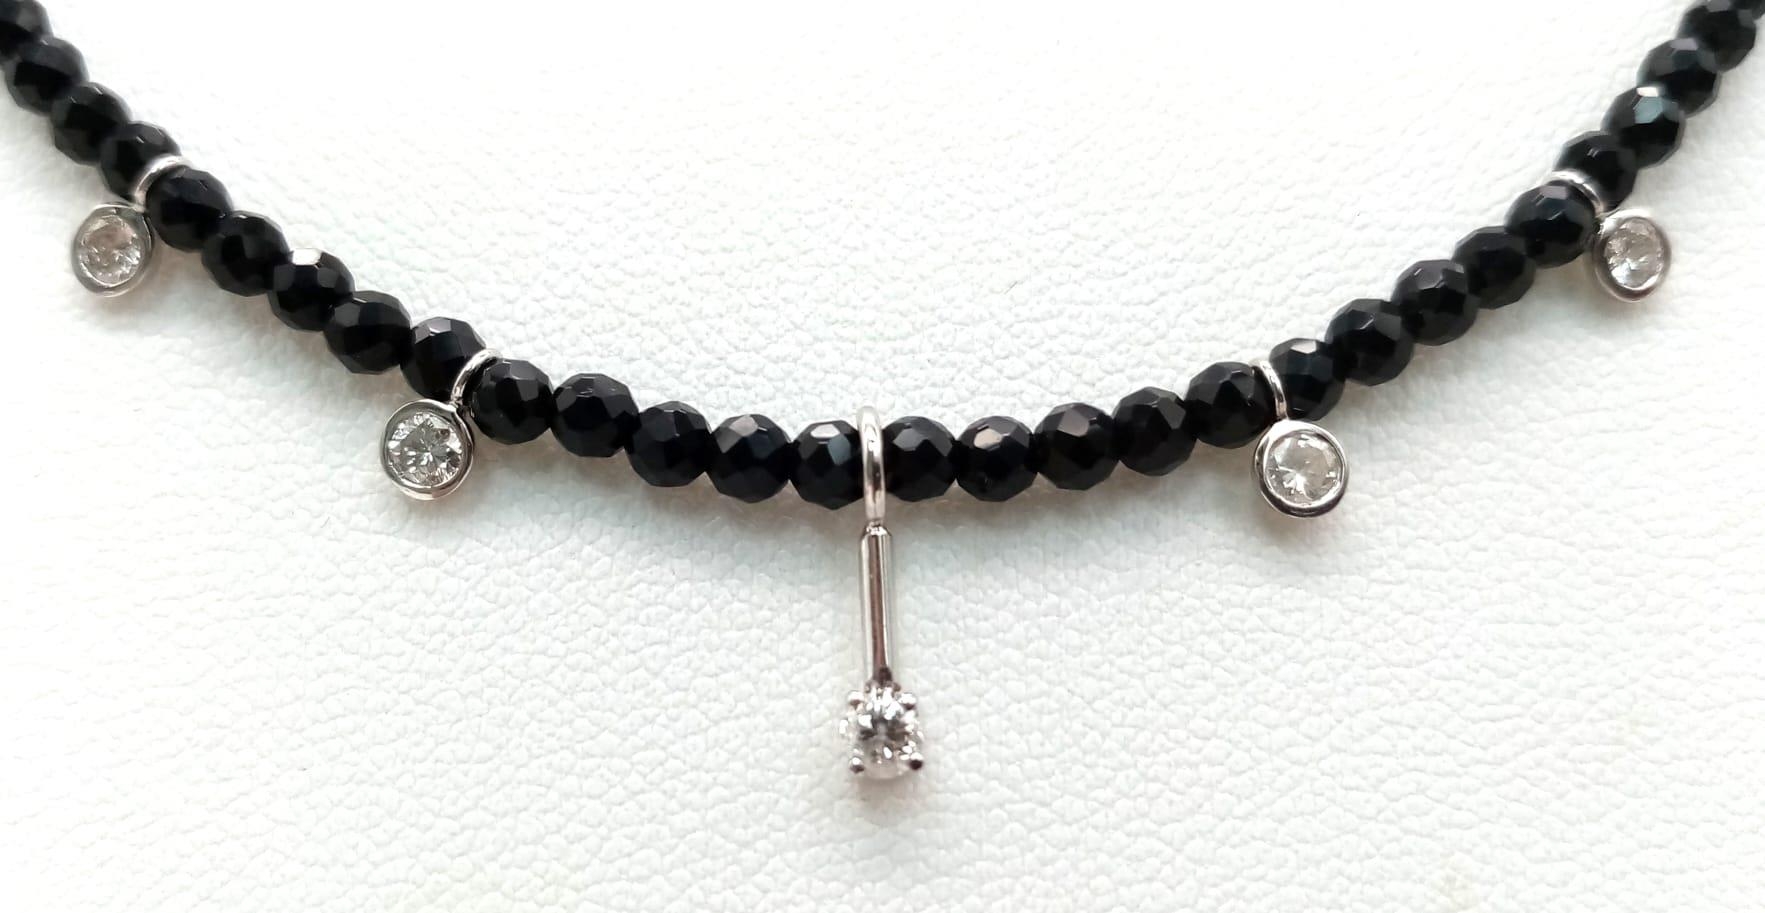 A Black Spinel Small Bead Necklace with Five Stone White Diamond Decoration. 0.5ctw. 14k gold clasp. - Image 3 of 5